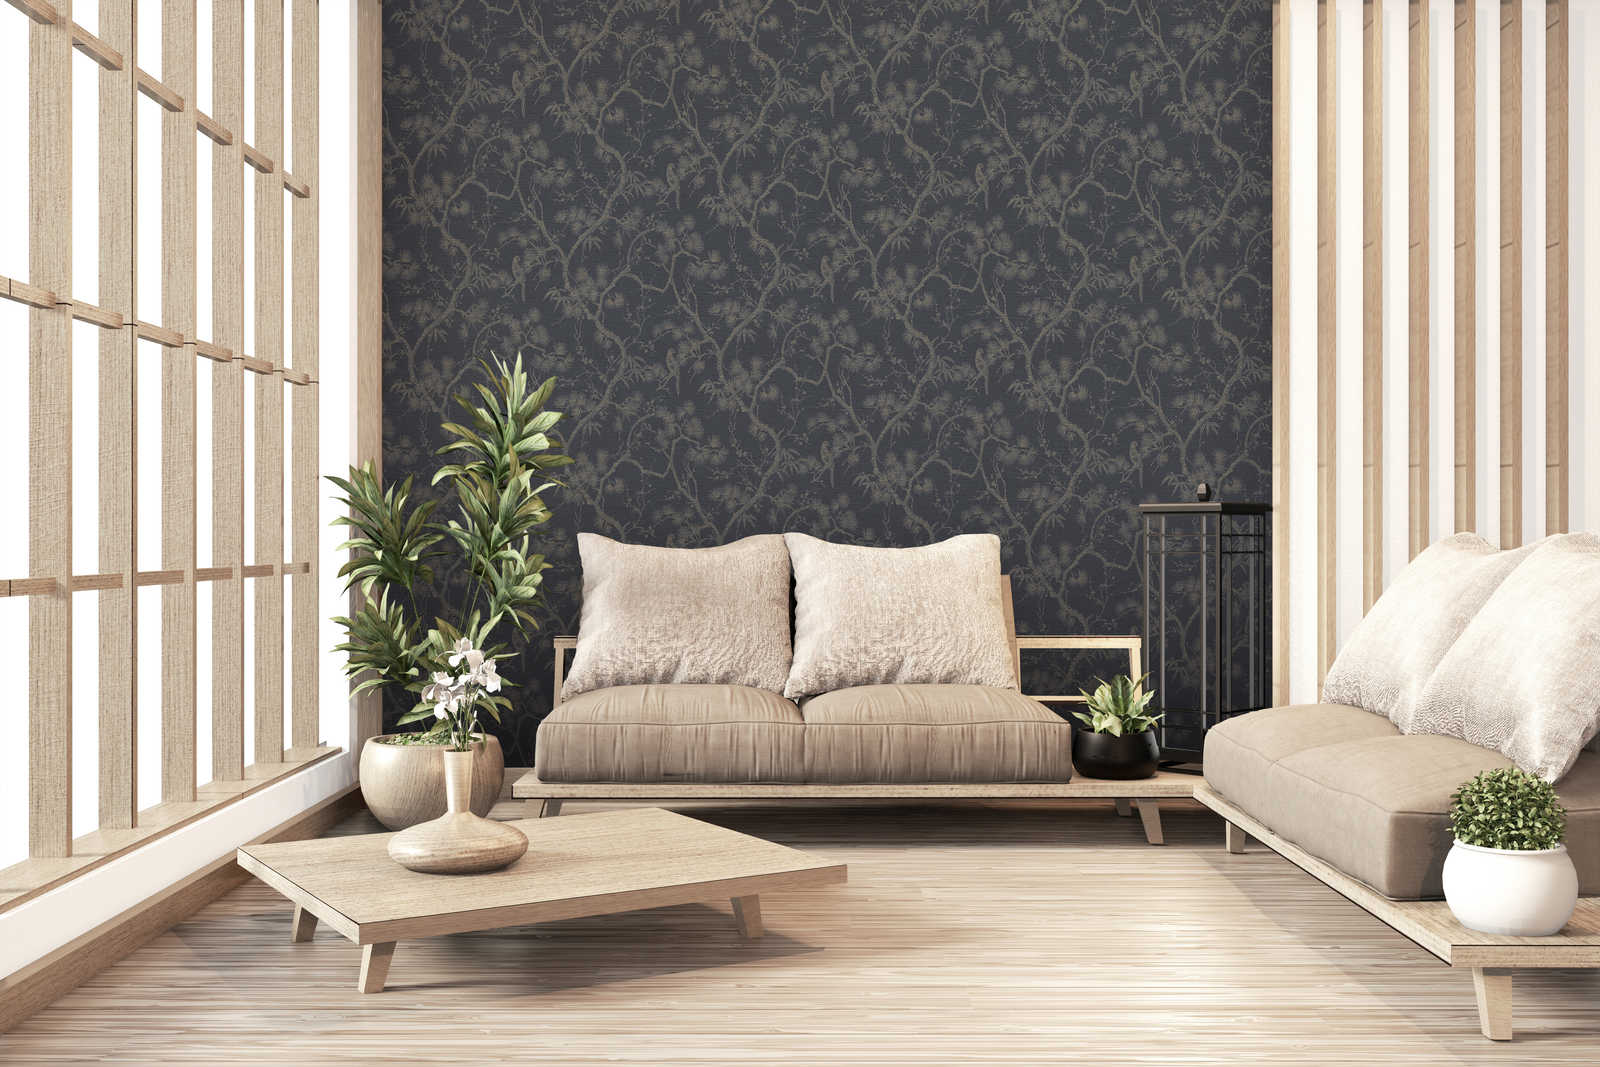             Non-woven wallpaper in Asian style with gold effect - grey, metallic, black
        